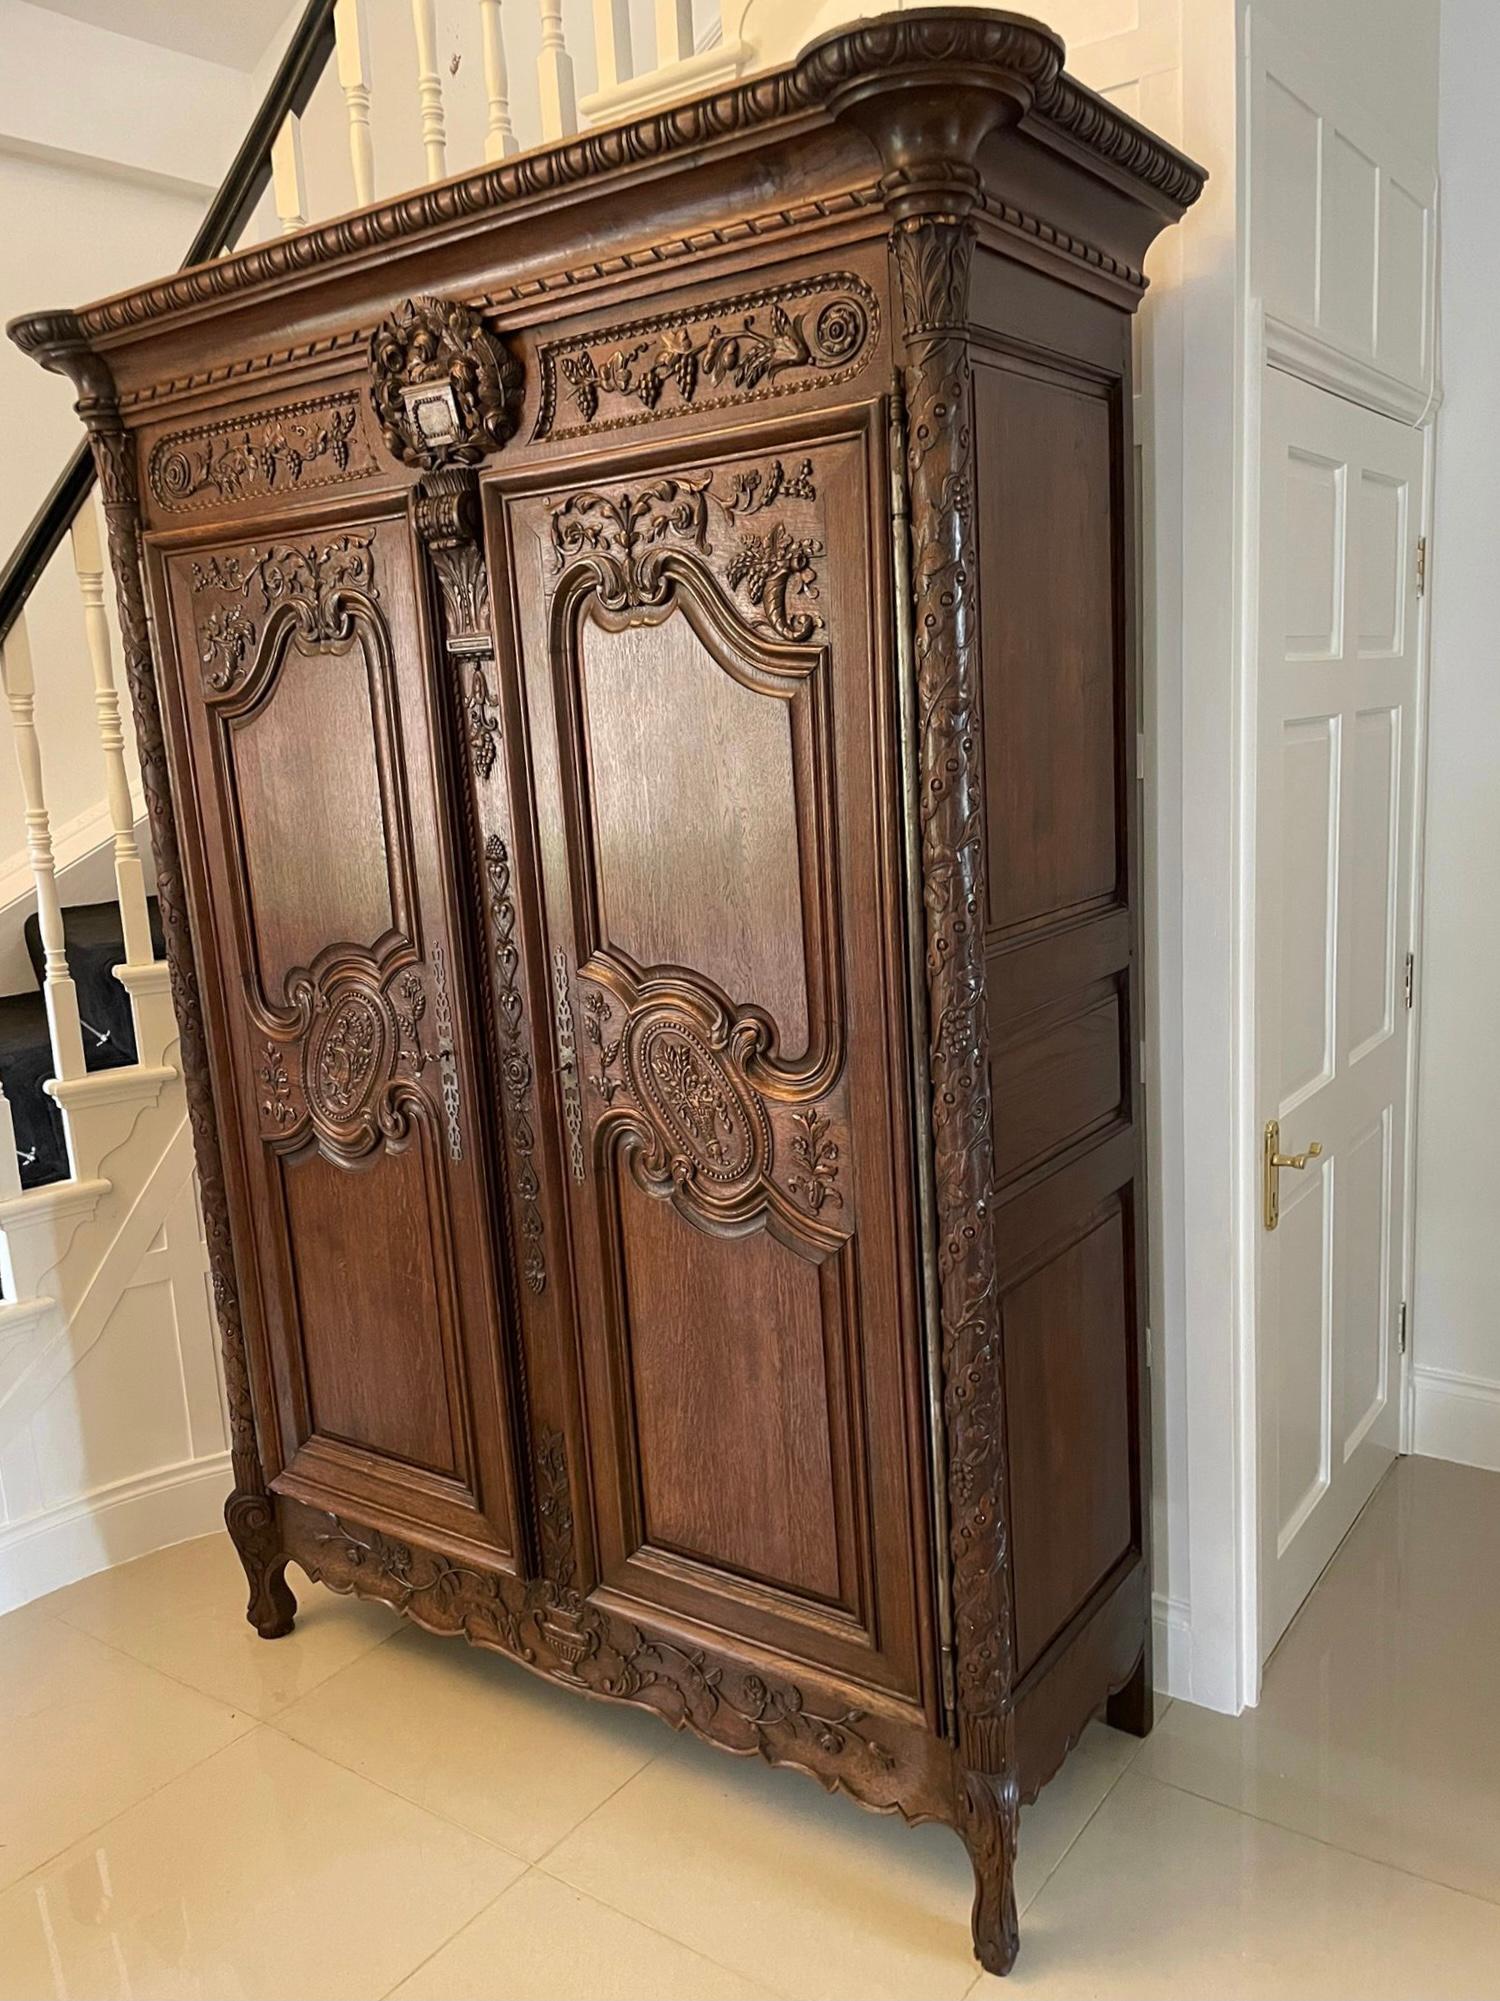 Outstanding quality antique Victorian large carved oak wardrobe having an outstanding quality carved cornice above a beautifully carved frieze with carved grapes, swag, flowers and leaves supported by a carved centre section flanked by a pair of